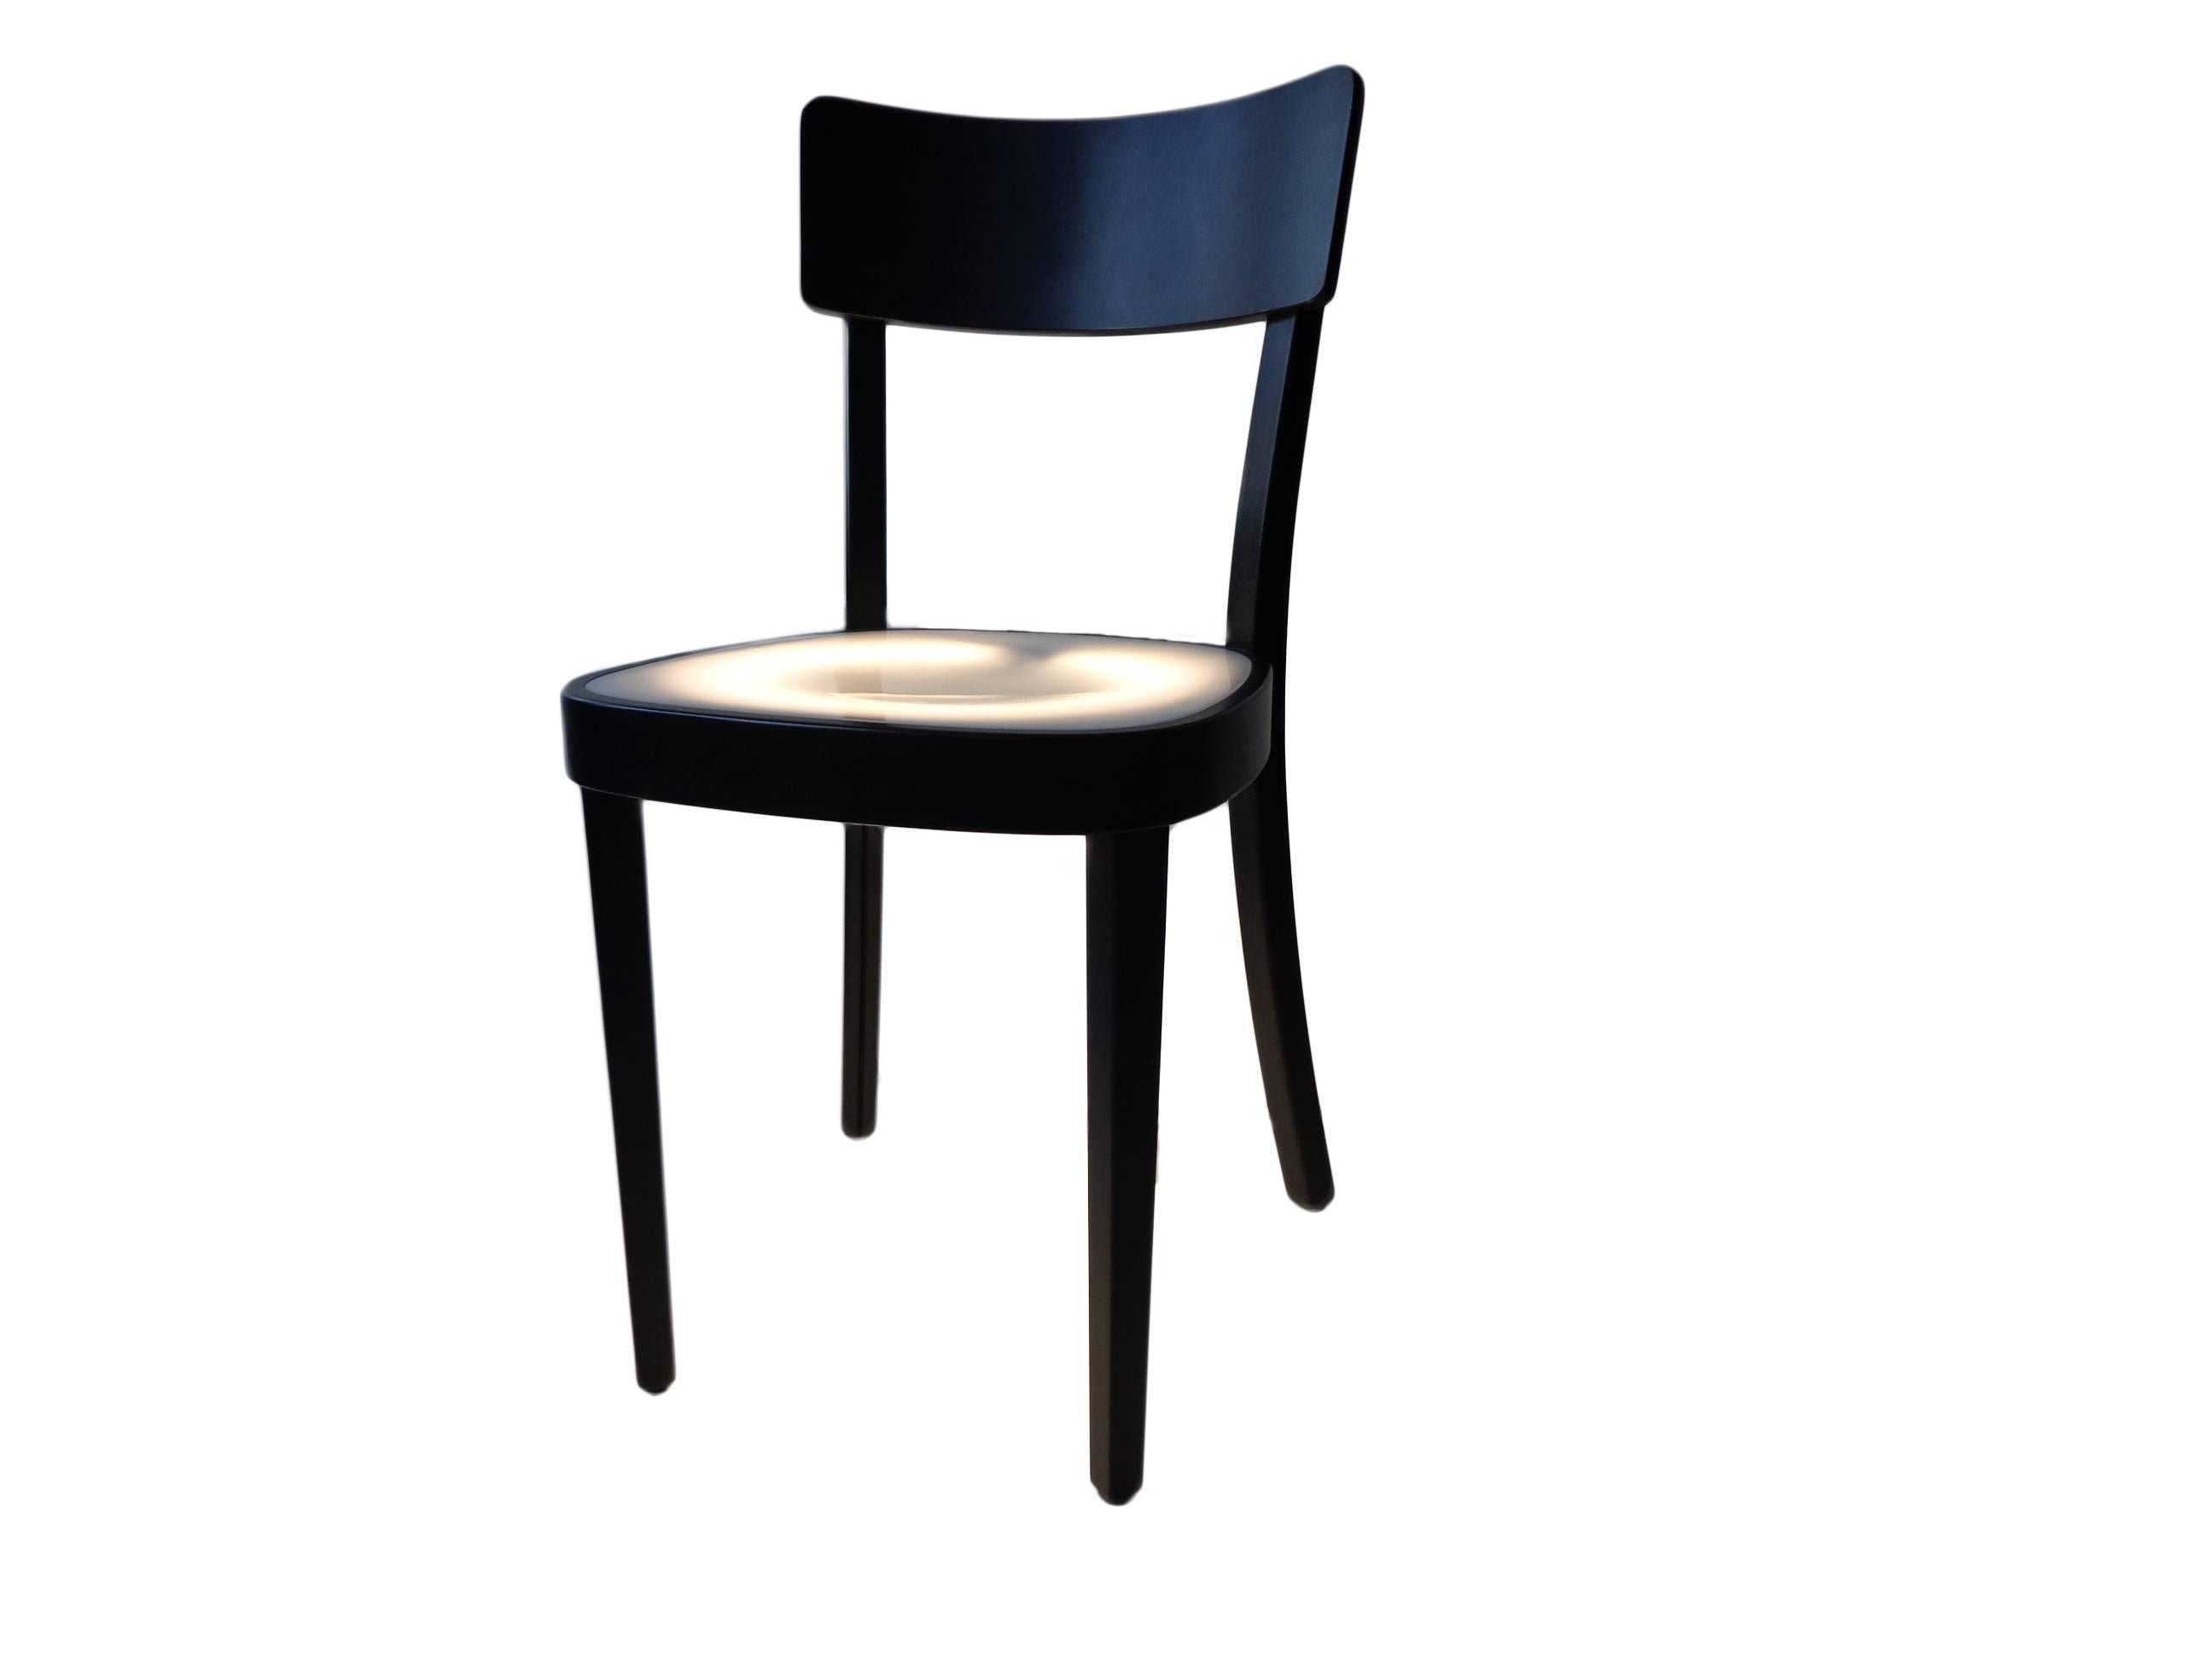 Offerd by Zitzo, Amsterdam: Very rare neonlight chair, model Pof1.

The chair is in the permanent collection of the V & A Museum in London.

literature: productcatalogue Hidden NL, see images.

Shipping services:
Ask for our competitive shipping